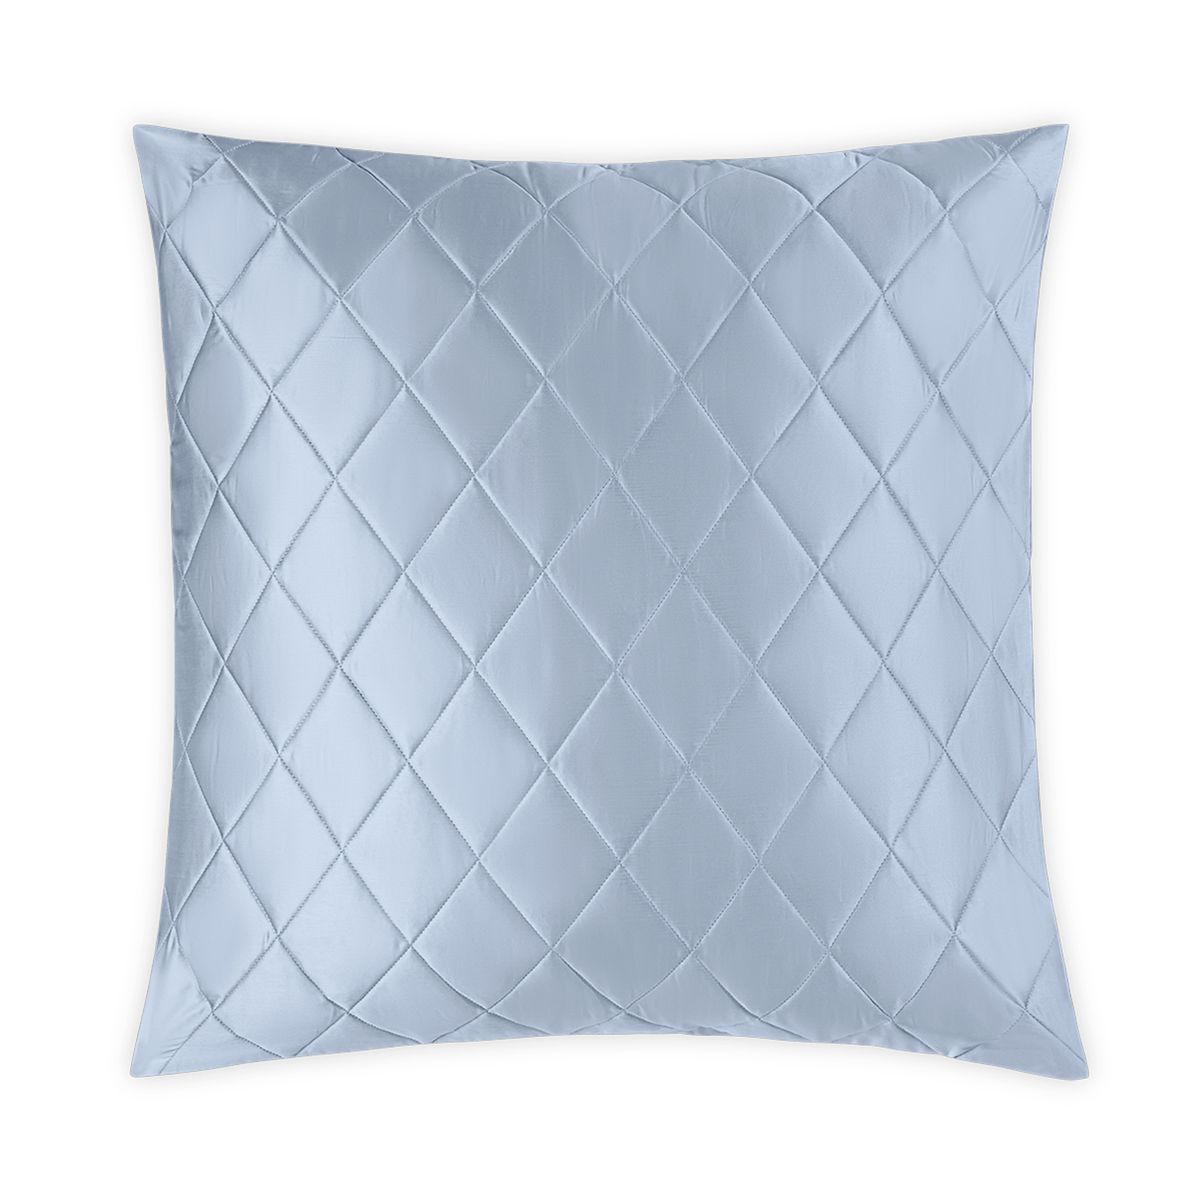 Silo Image of Matouk Nocturne Quilted Bedding Euro Sham in Hazy Blue Color